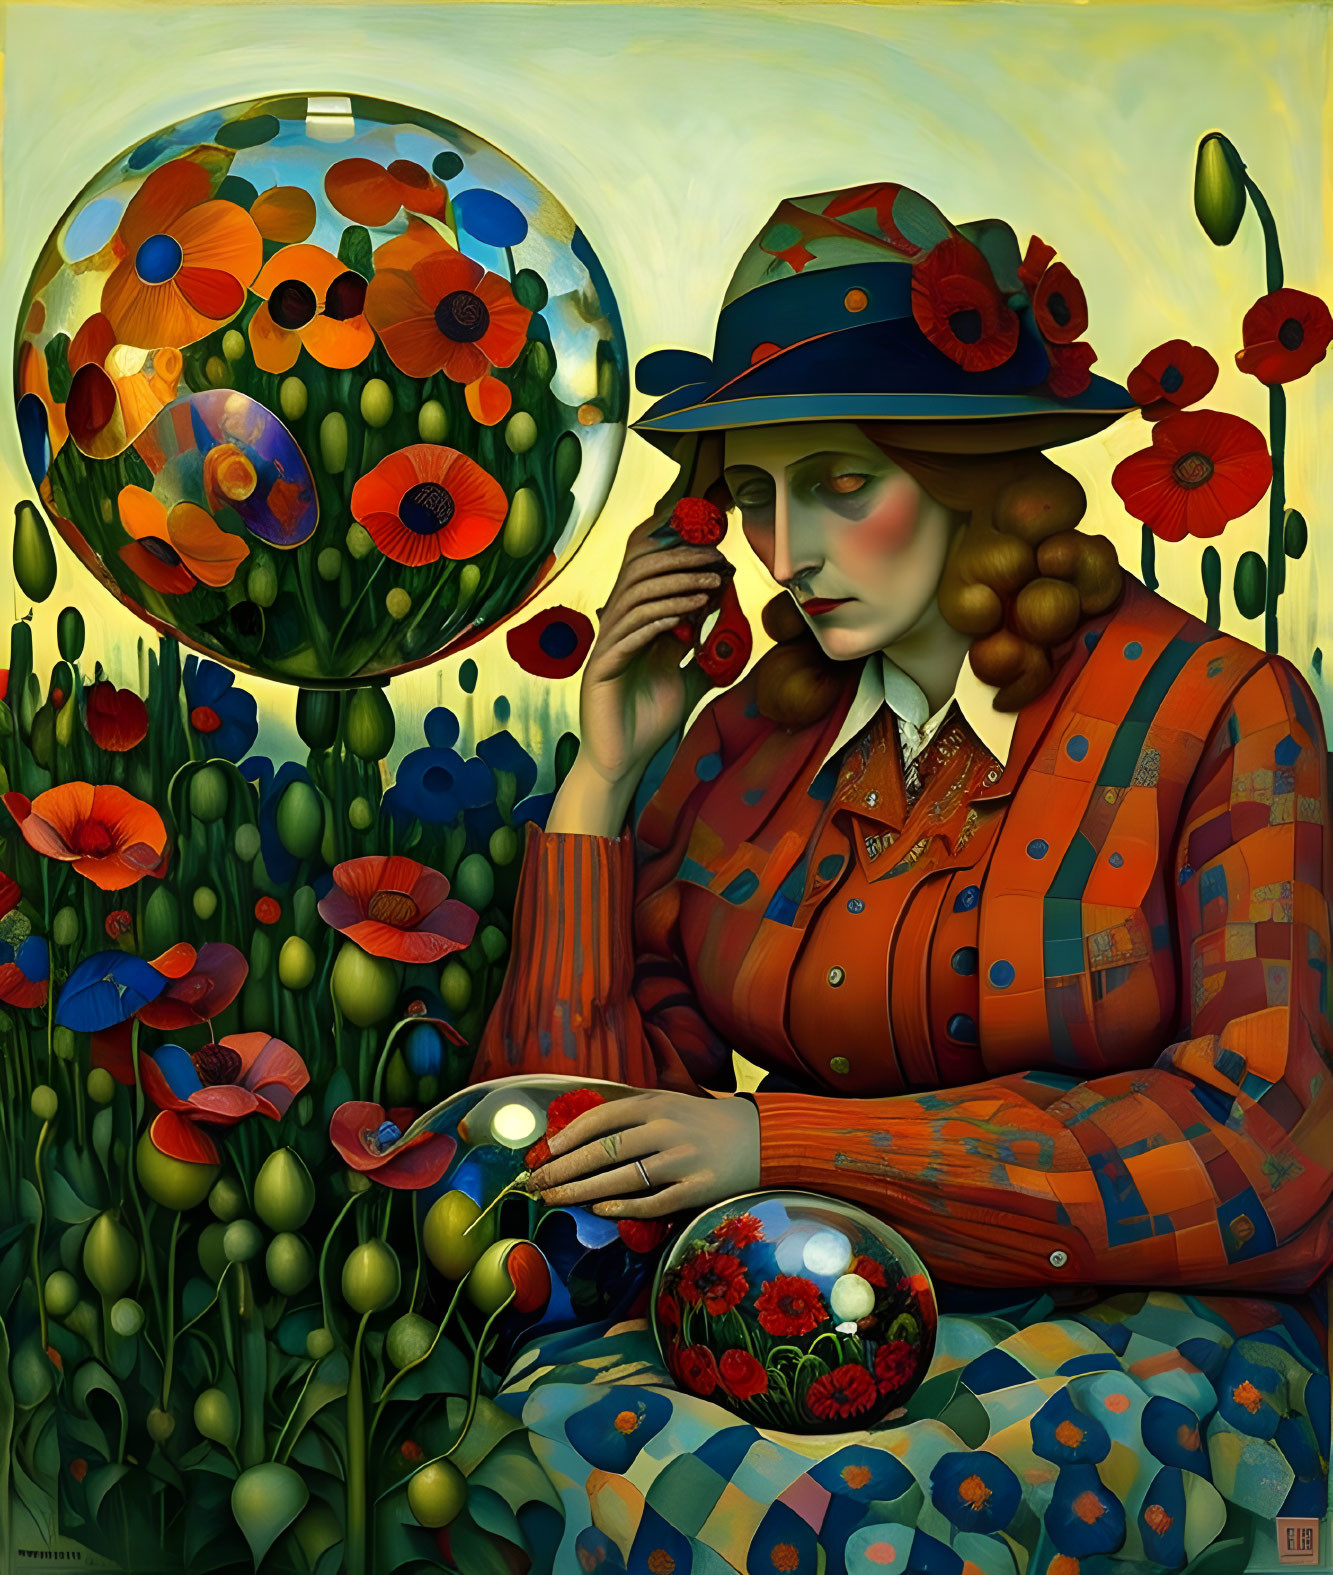 Poor woman with a glass ball and poppies